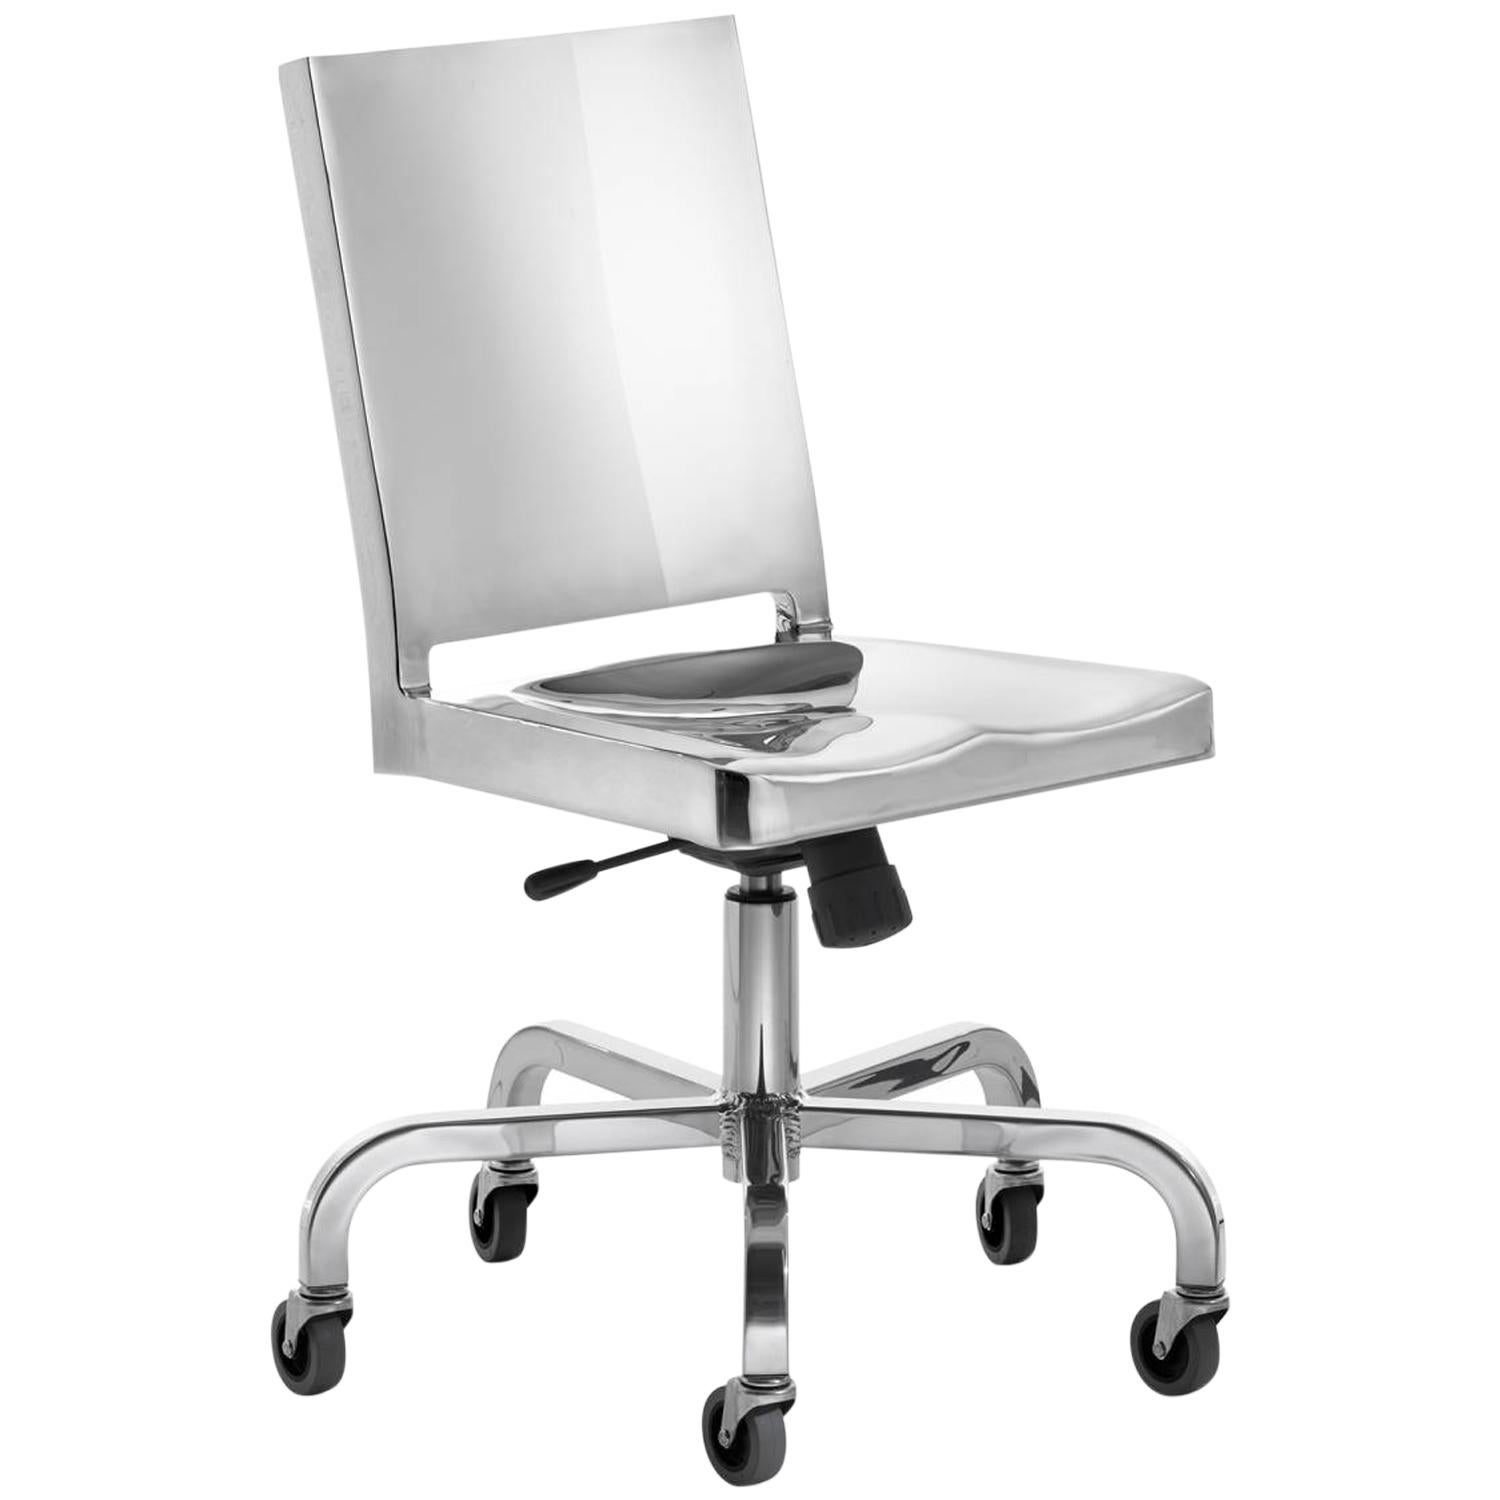 Emeco Hudson Swivel Chair in Polished Aluminium by Philippe Starck For Sale